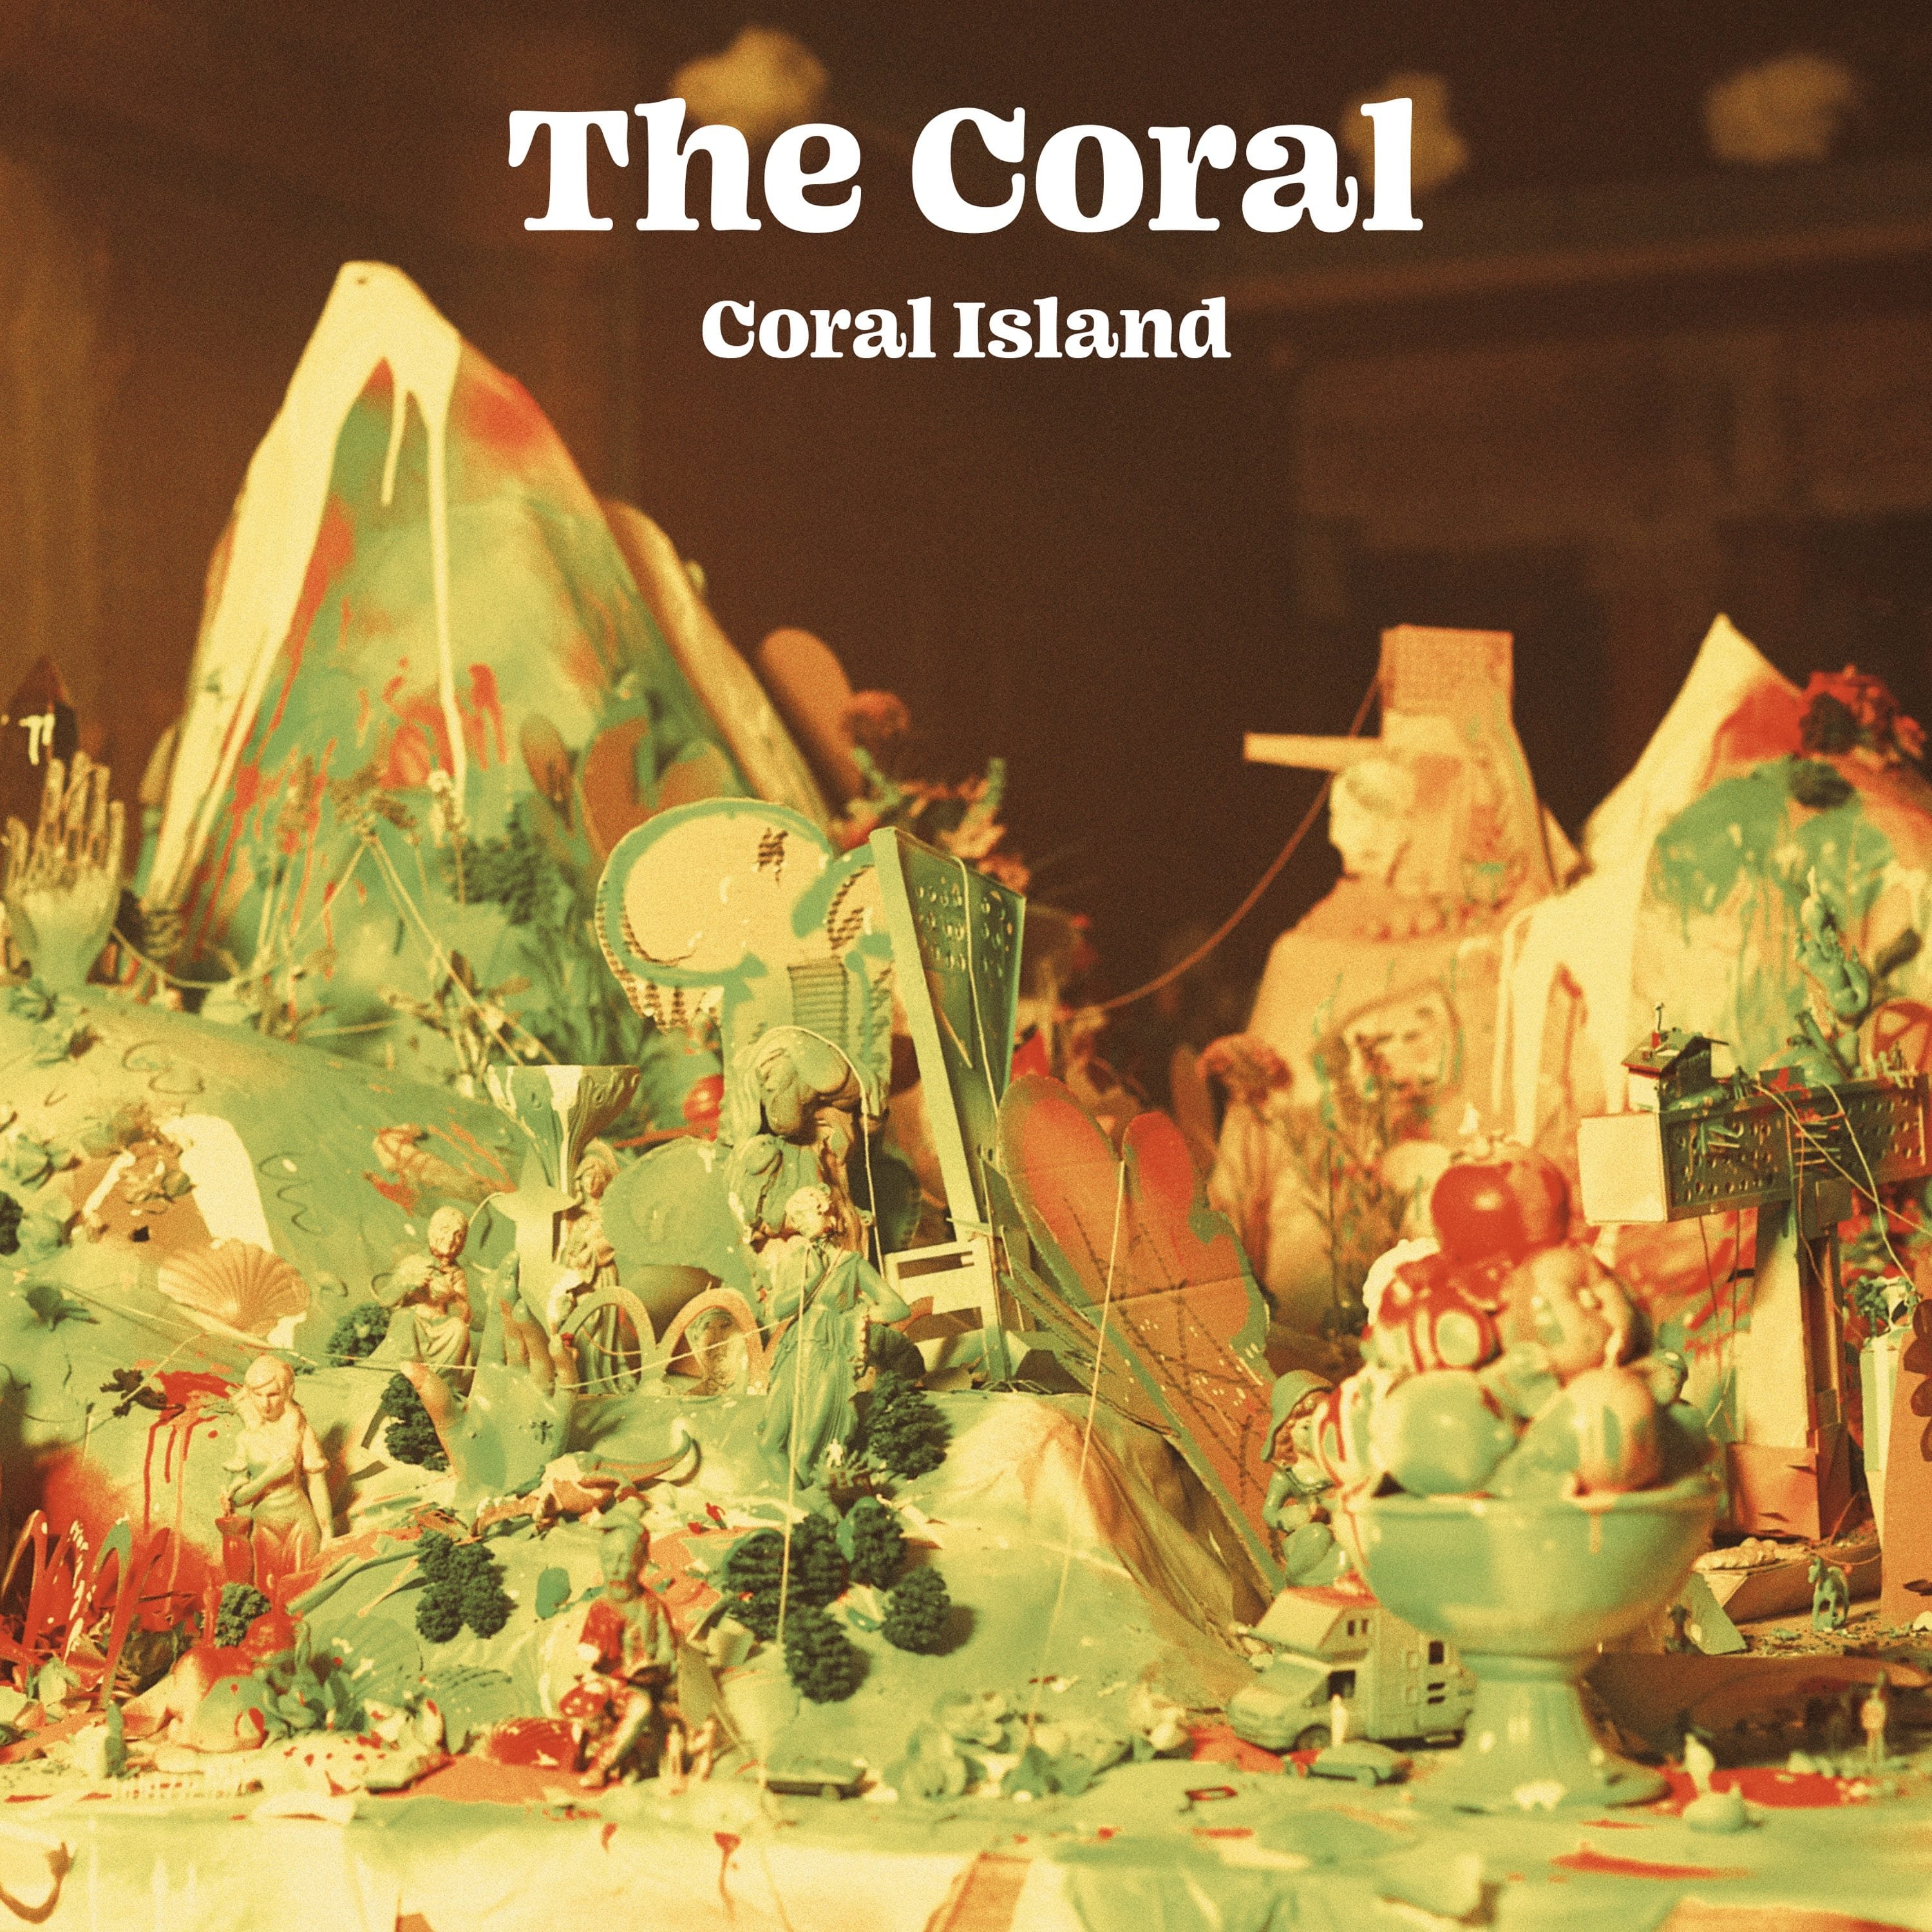 The coral has